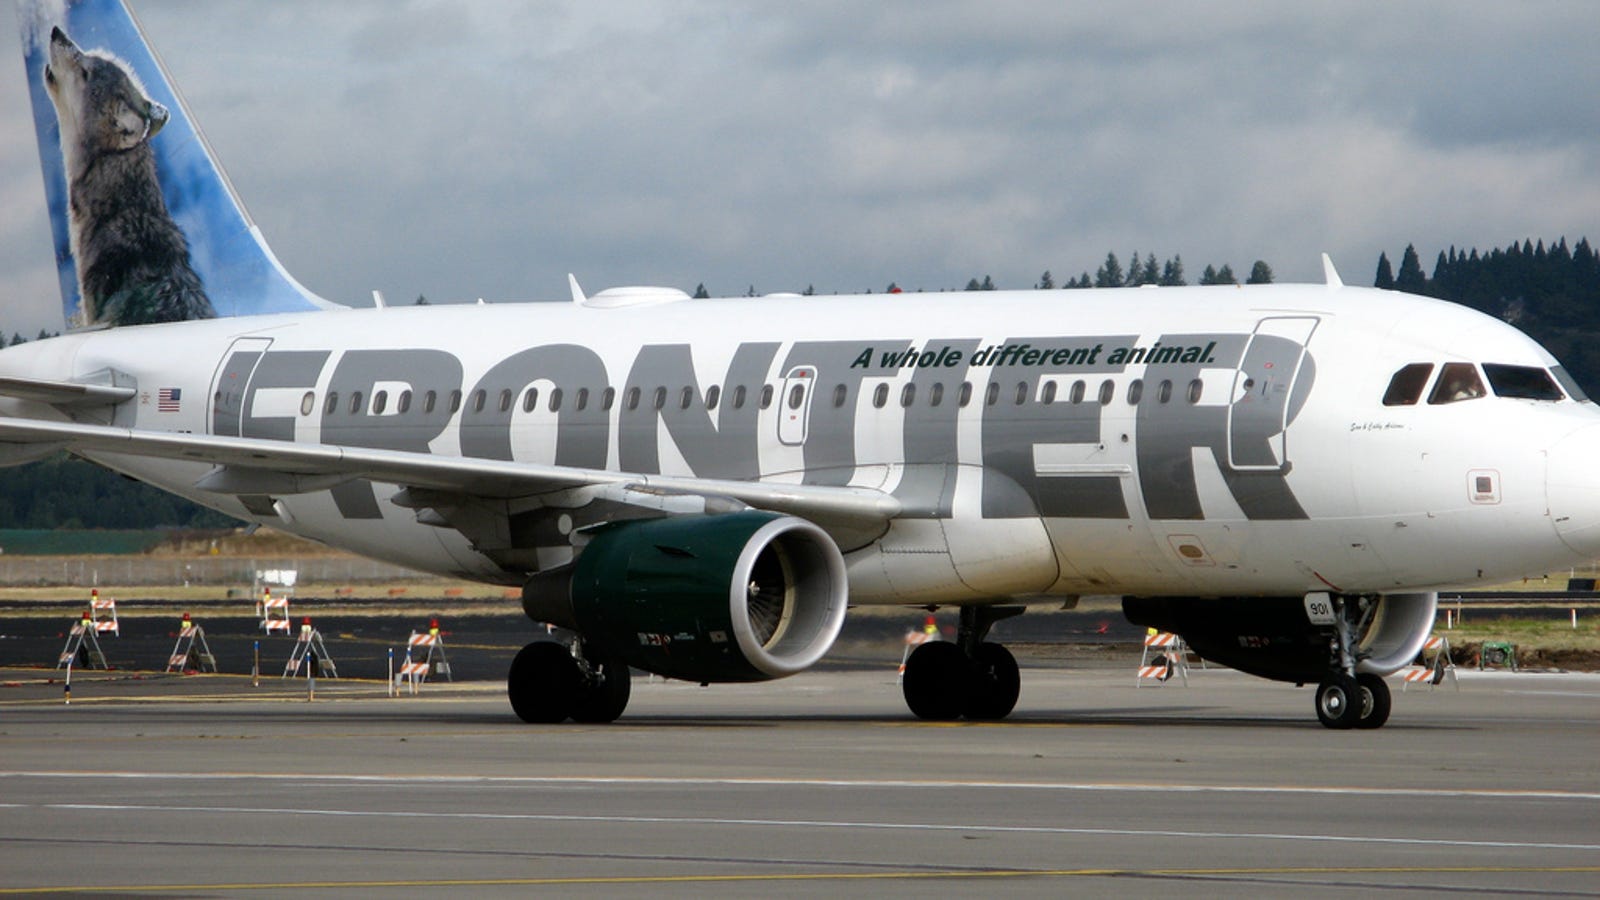 Does anyone fly Frontier Airlines?